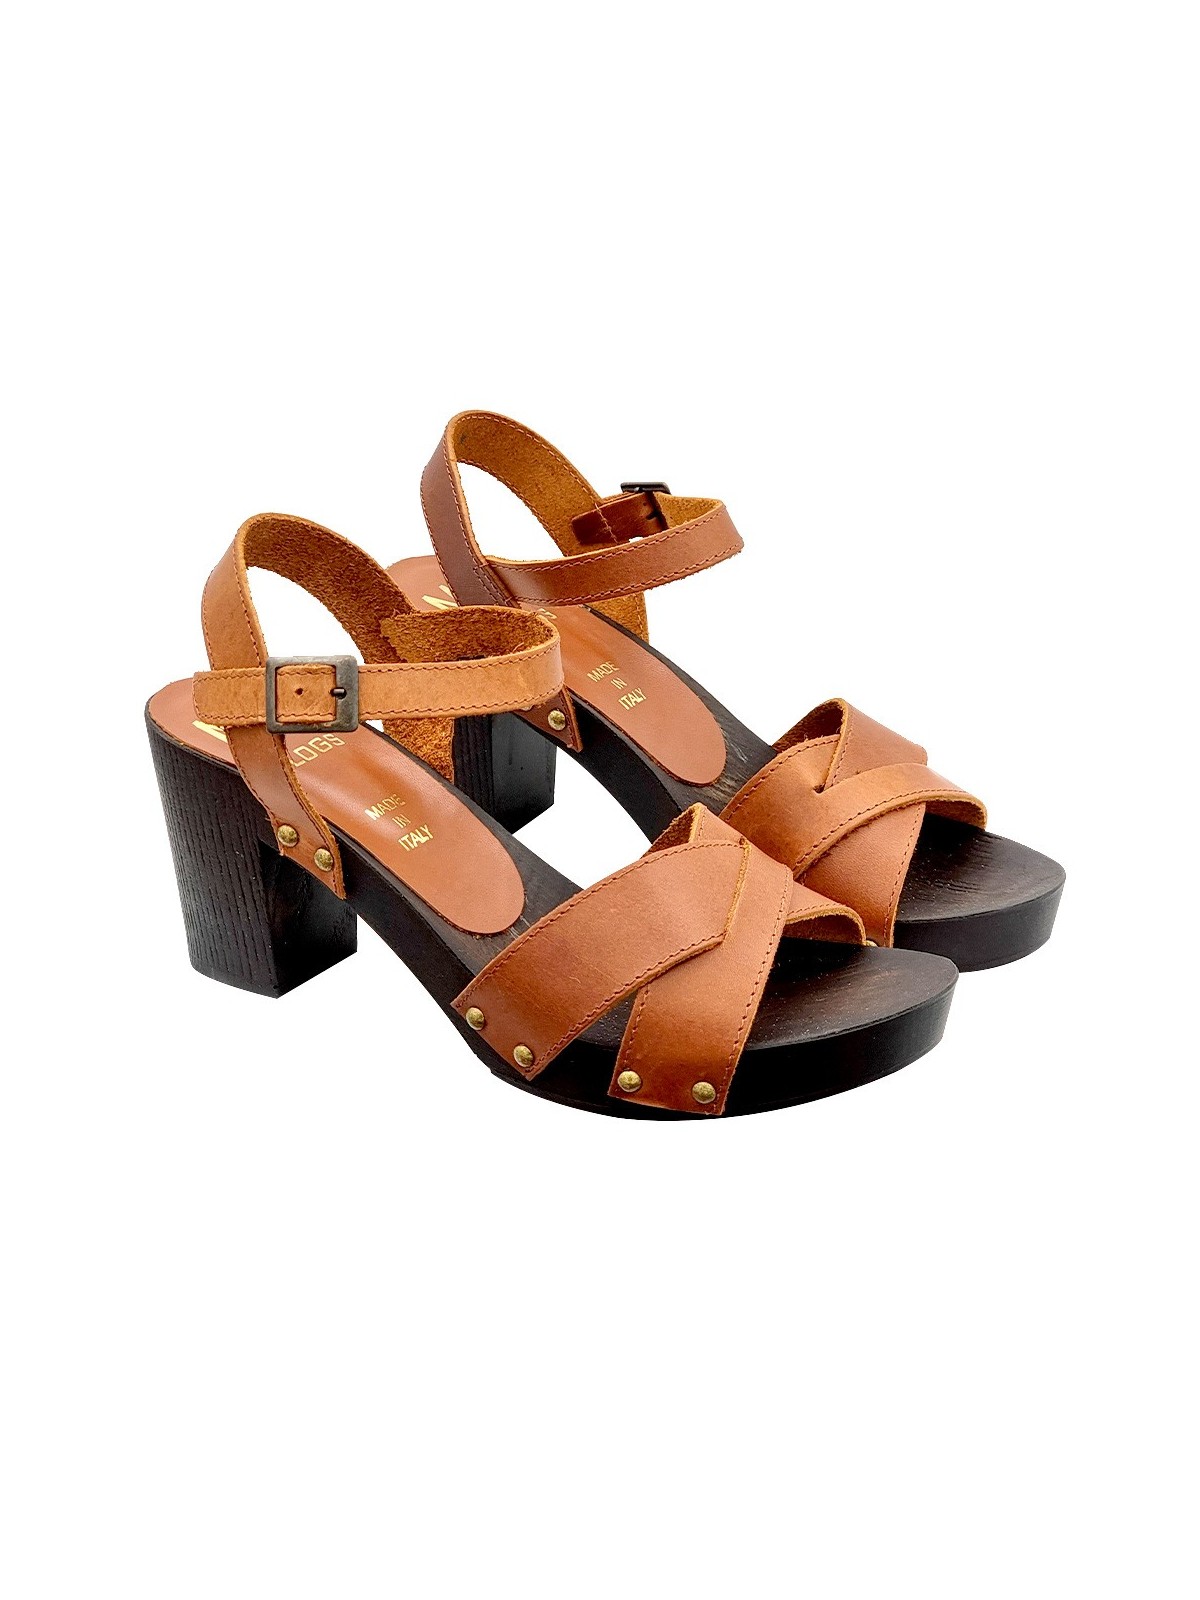 BROWN LEATHER SANDALS WITH CROSSED BANDS